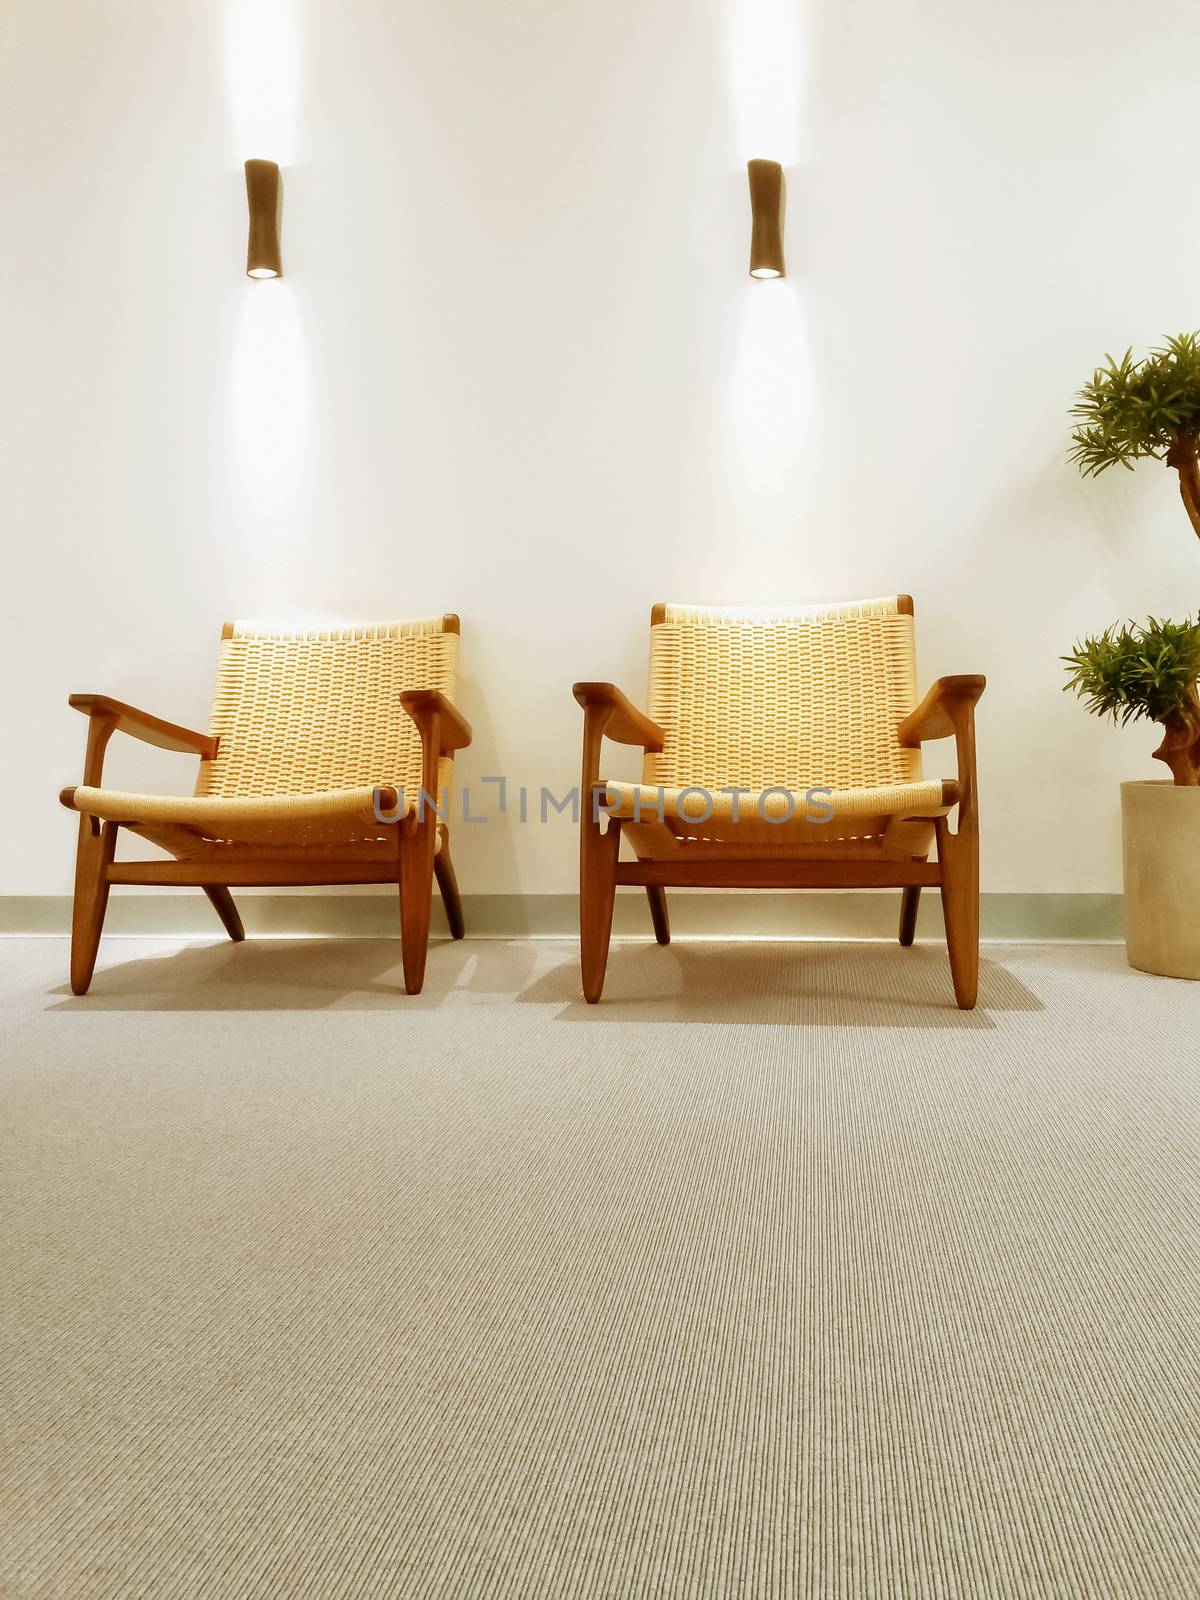 Interior with classic rattan chairs and carpet floor.